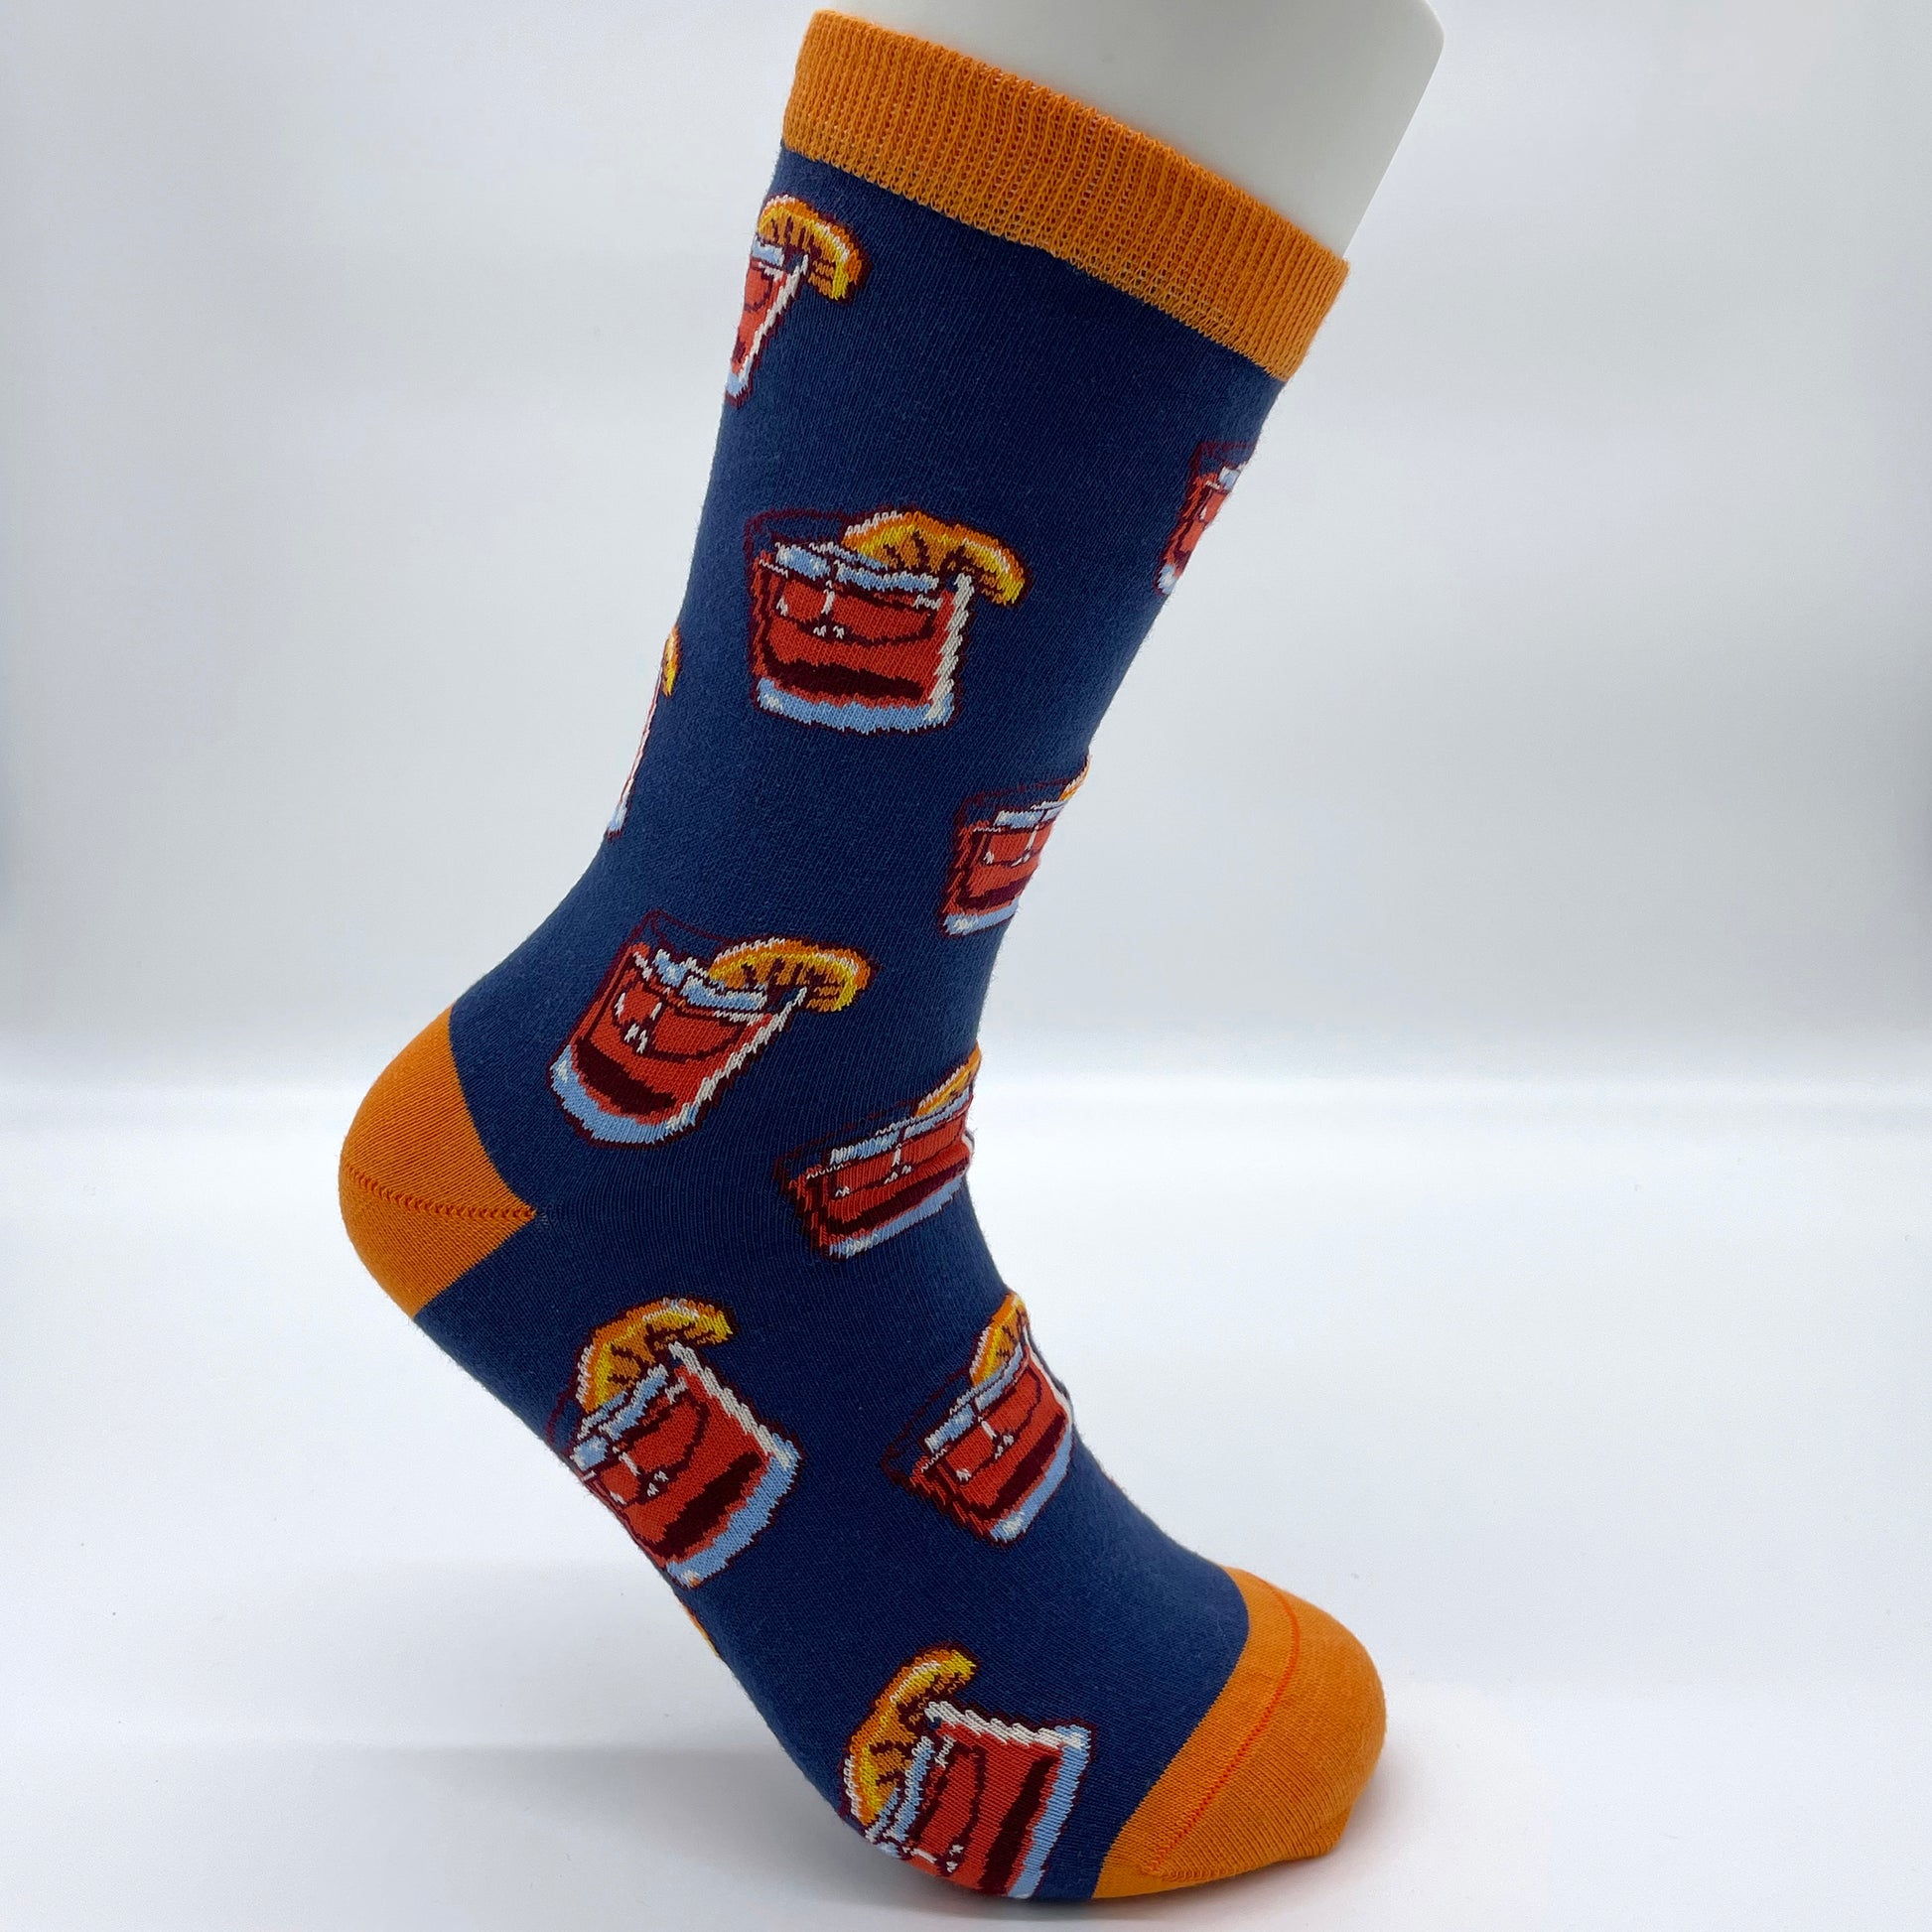 A white sock mannequin sports a blue sock patterned with glasses full of negronis. The welt, heel and toe is in orange.